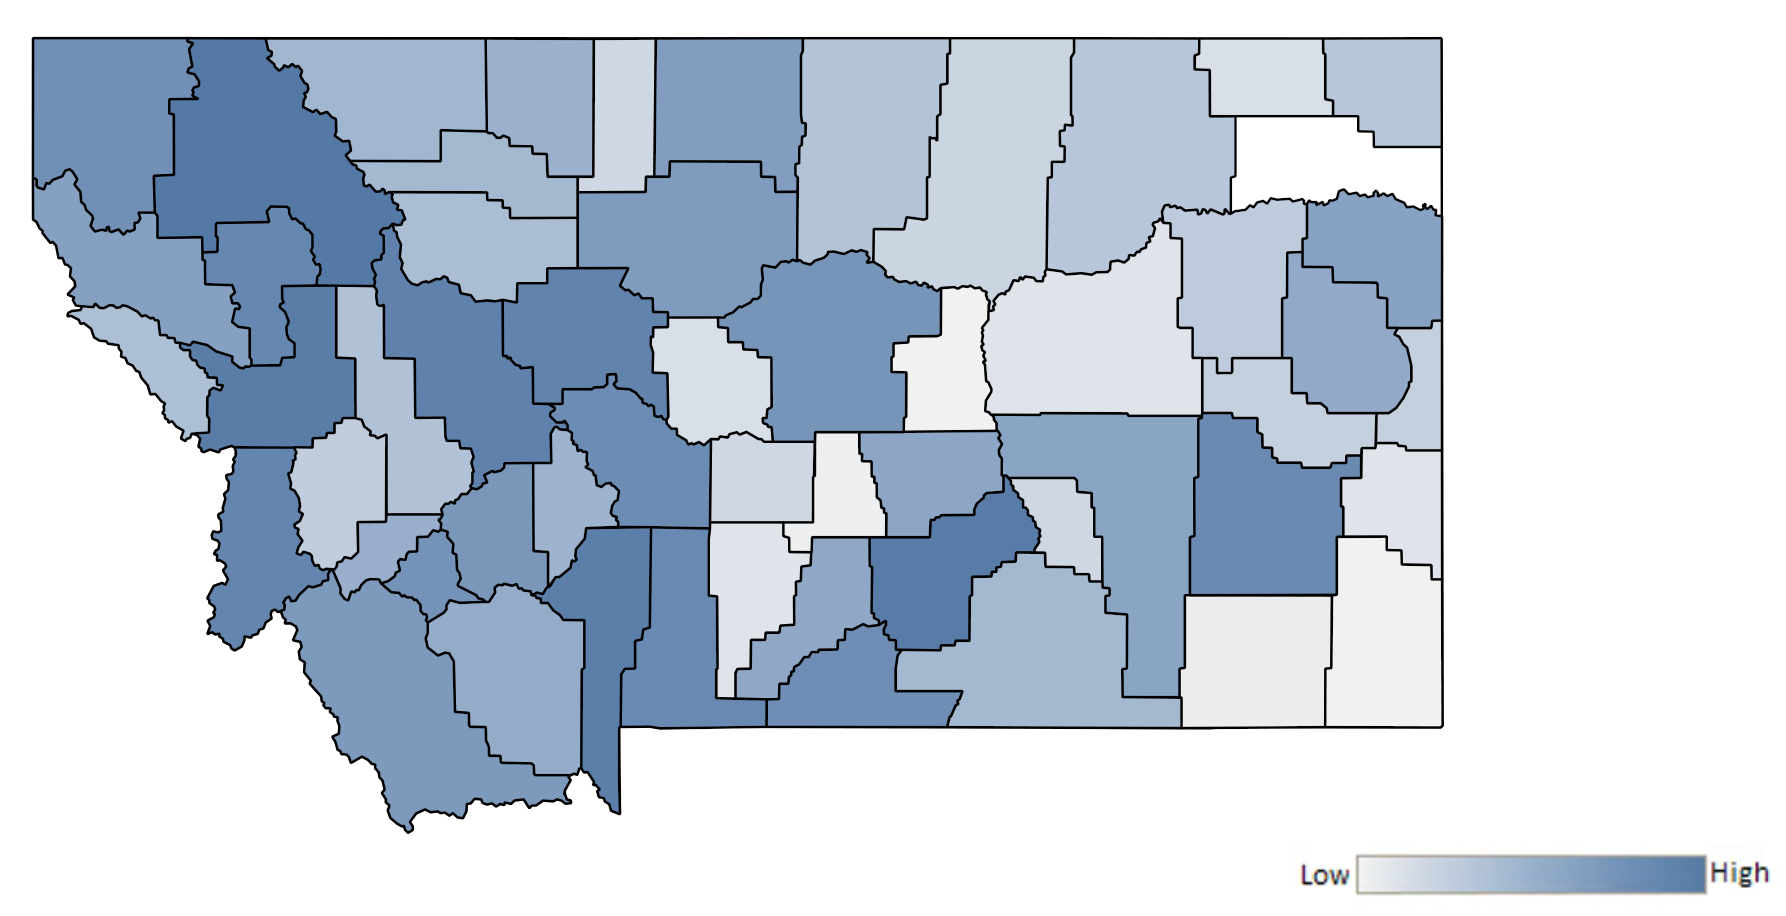 Map of Montana counties indicating relative number of complaints from low to high. See attached CSV file for complaint data by jurisdiction.